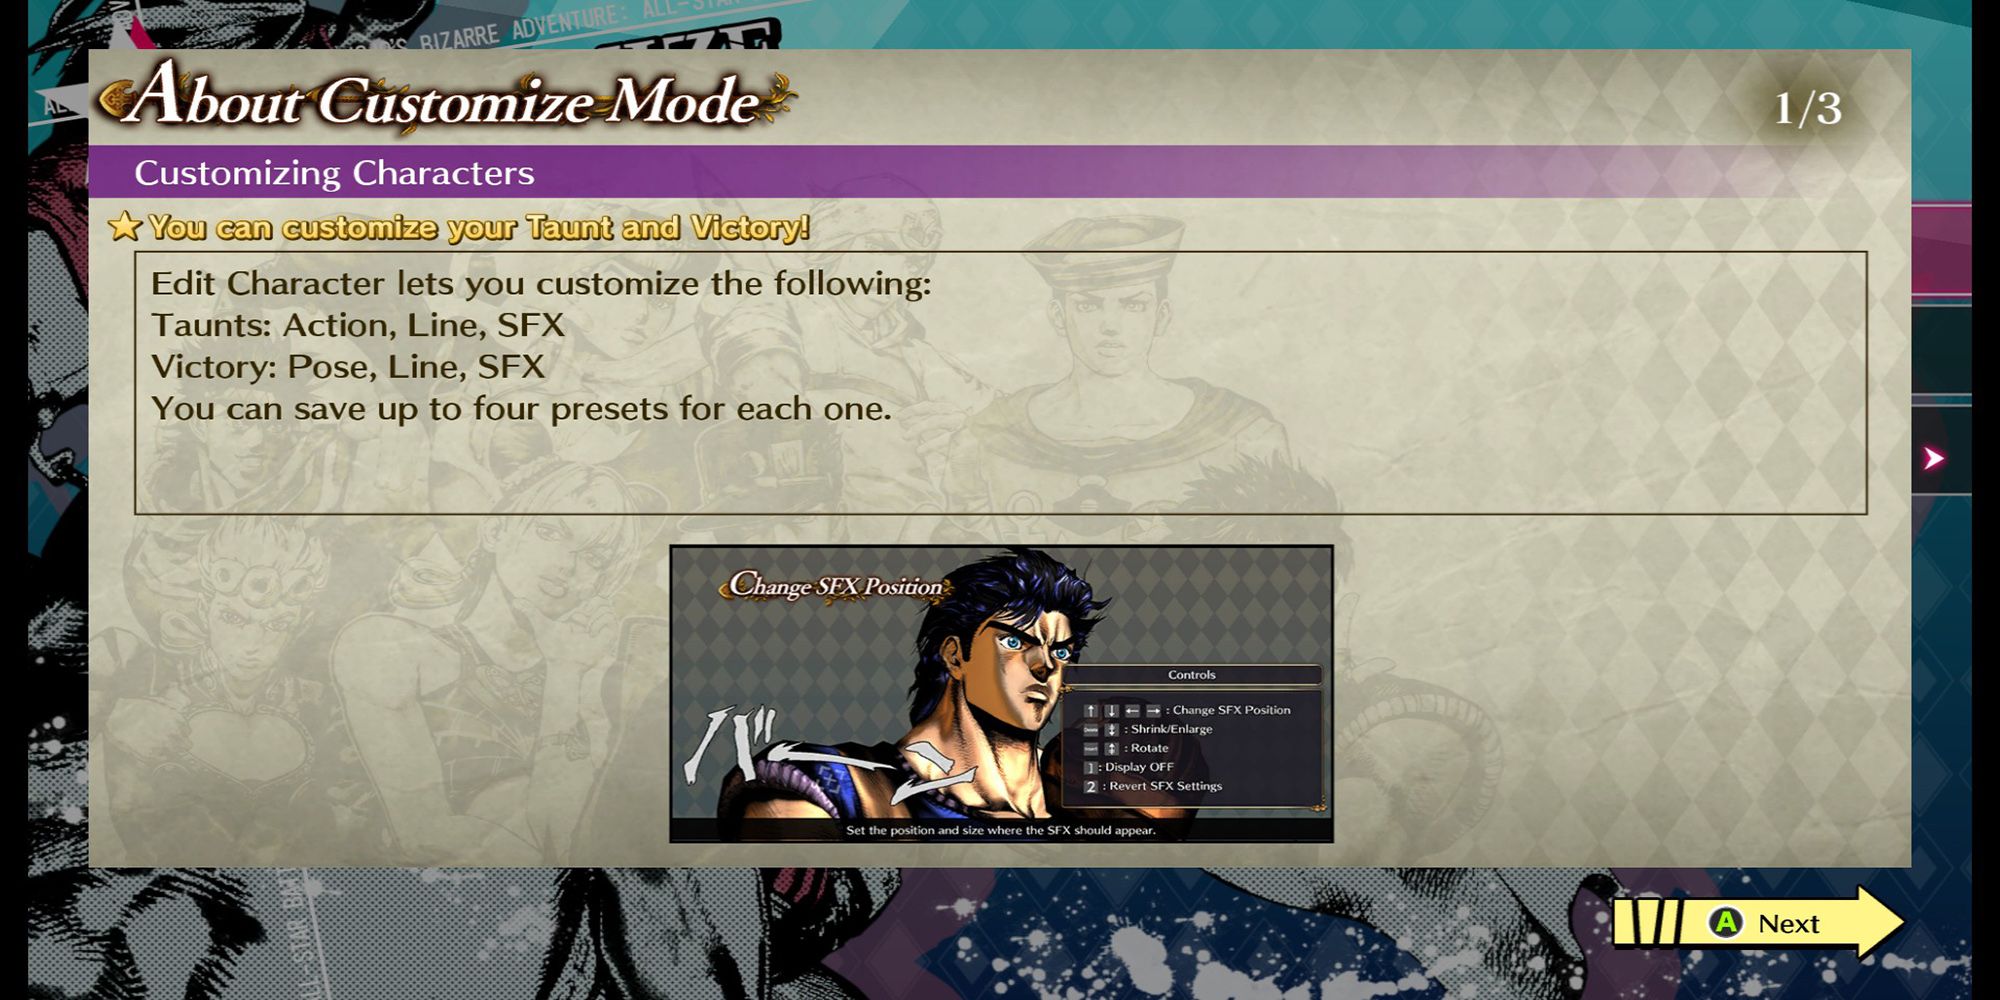 This tutorial explains how to change your character in customize mode in Jojo's Bizarre Adventure ASBR.